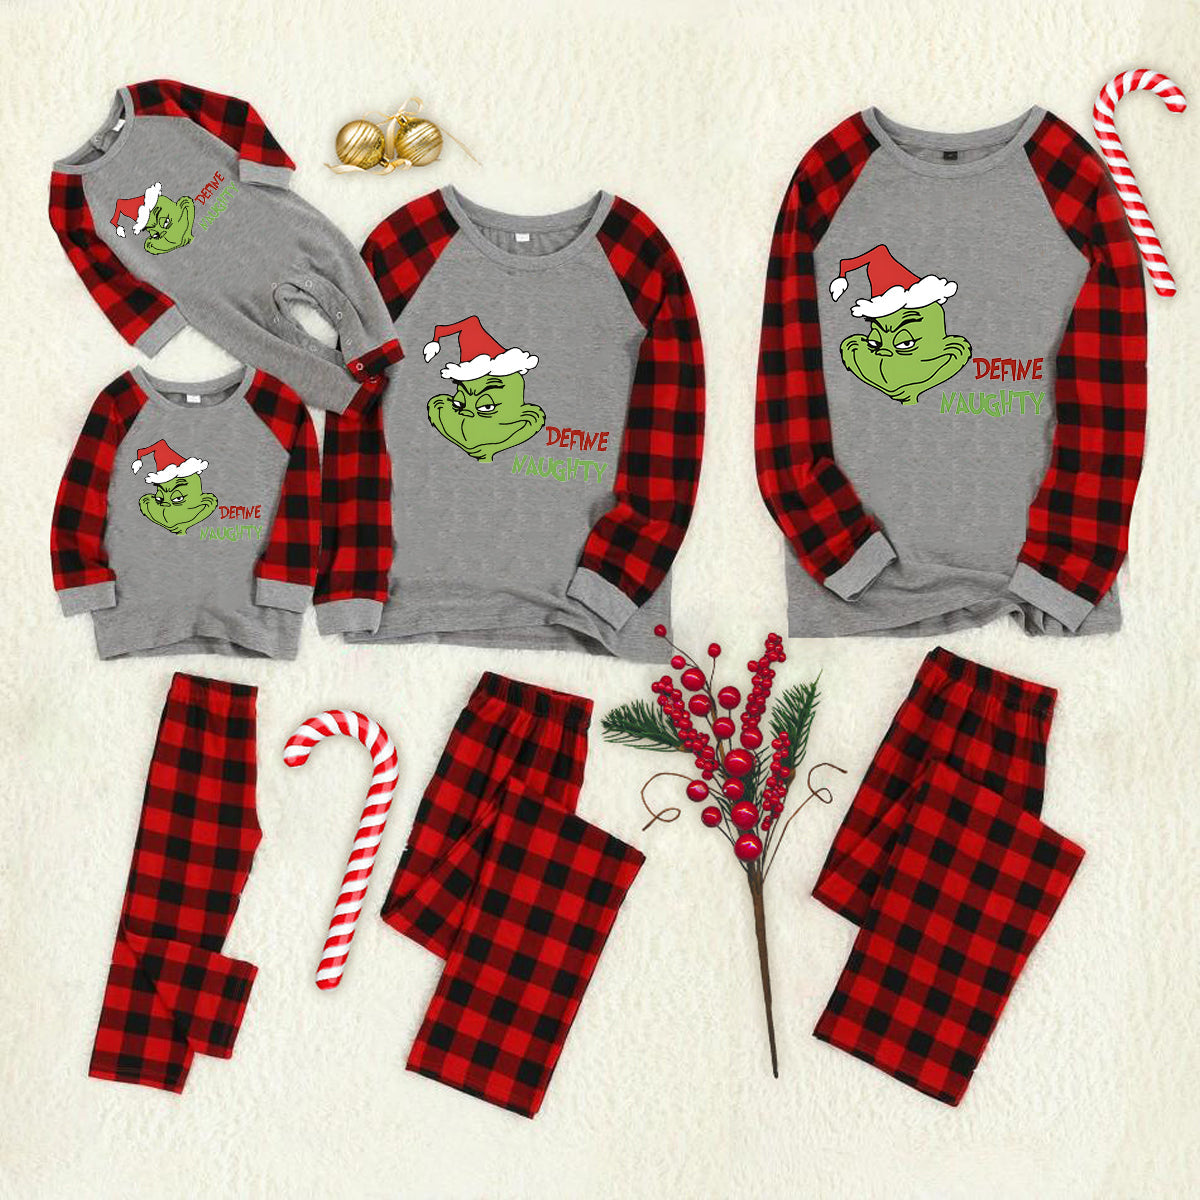 Christmas 'Define Naughty' Letter Print Patterned Casual Long Sleeve Sweatshirts Grey Contrast Top and Black & Red Plaid Pants Family Matching Pajamas Set With Dog Bandana